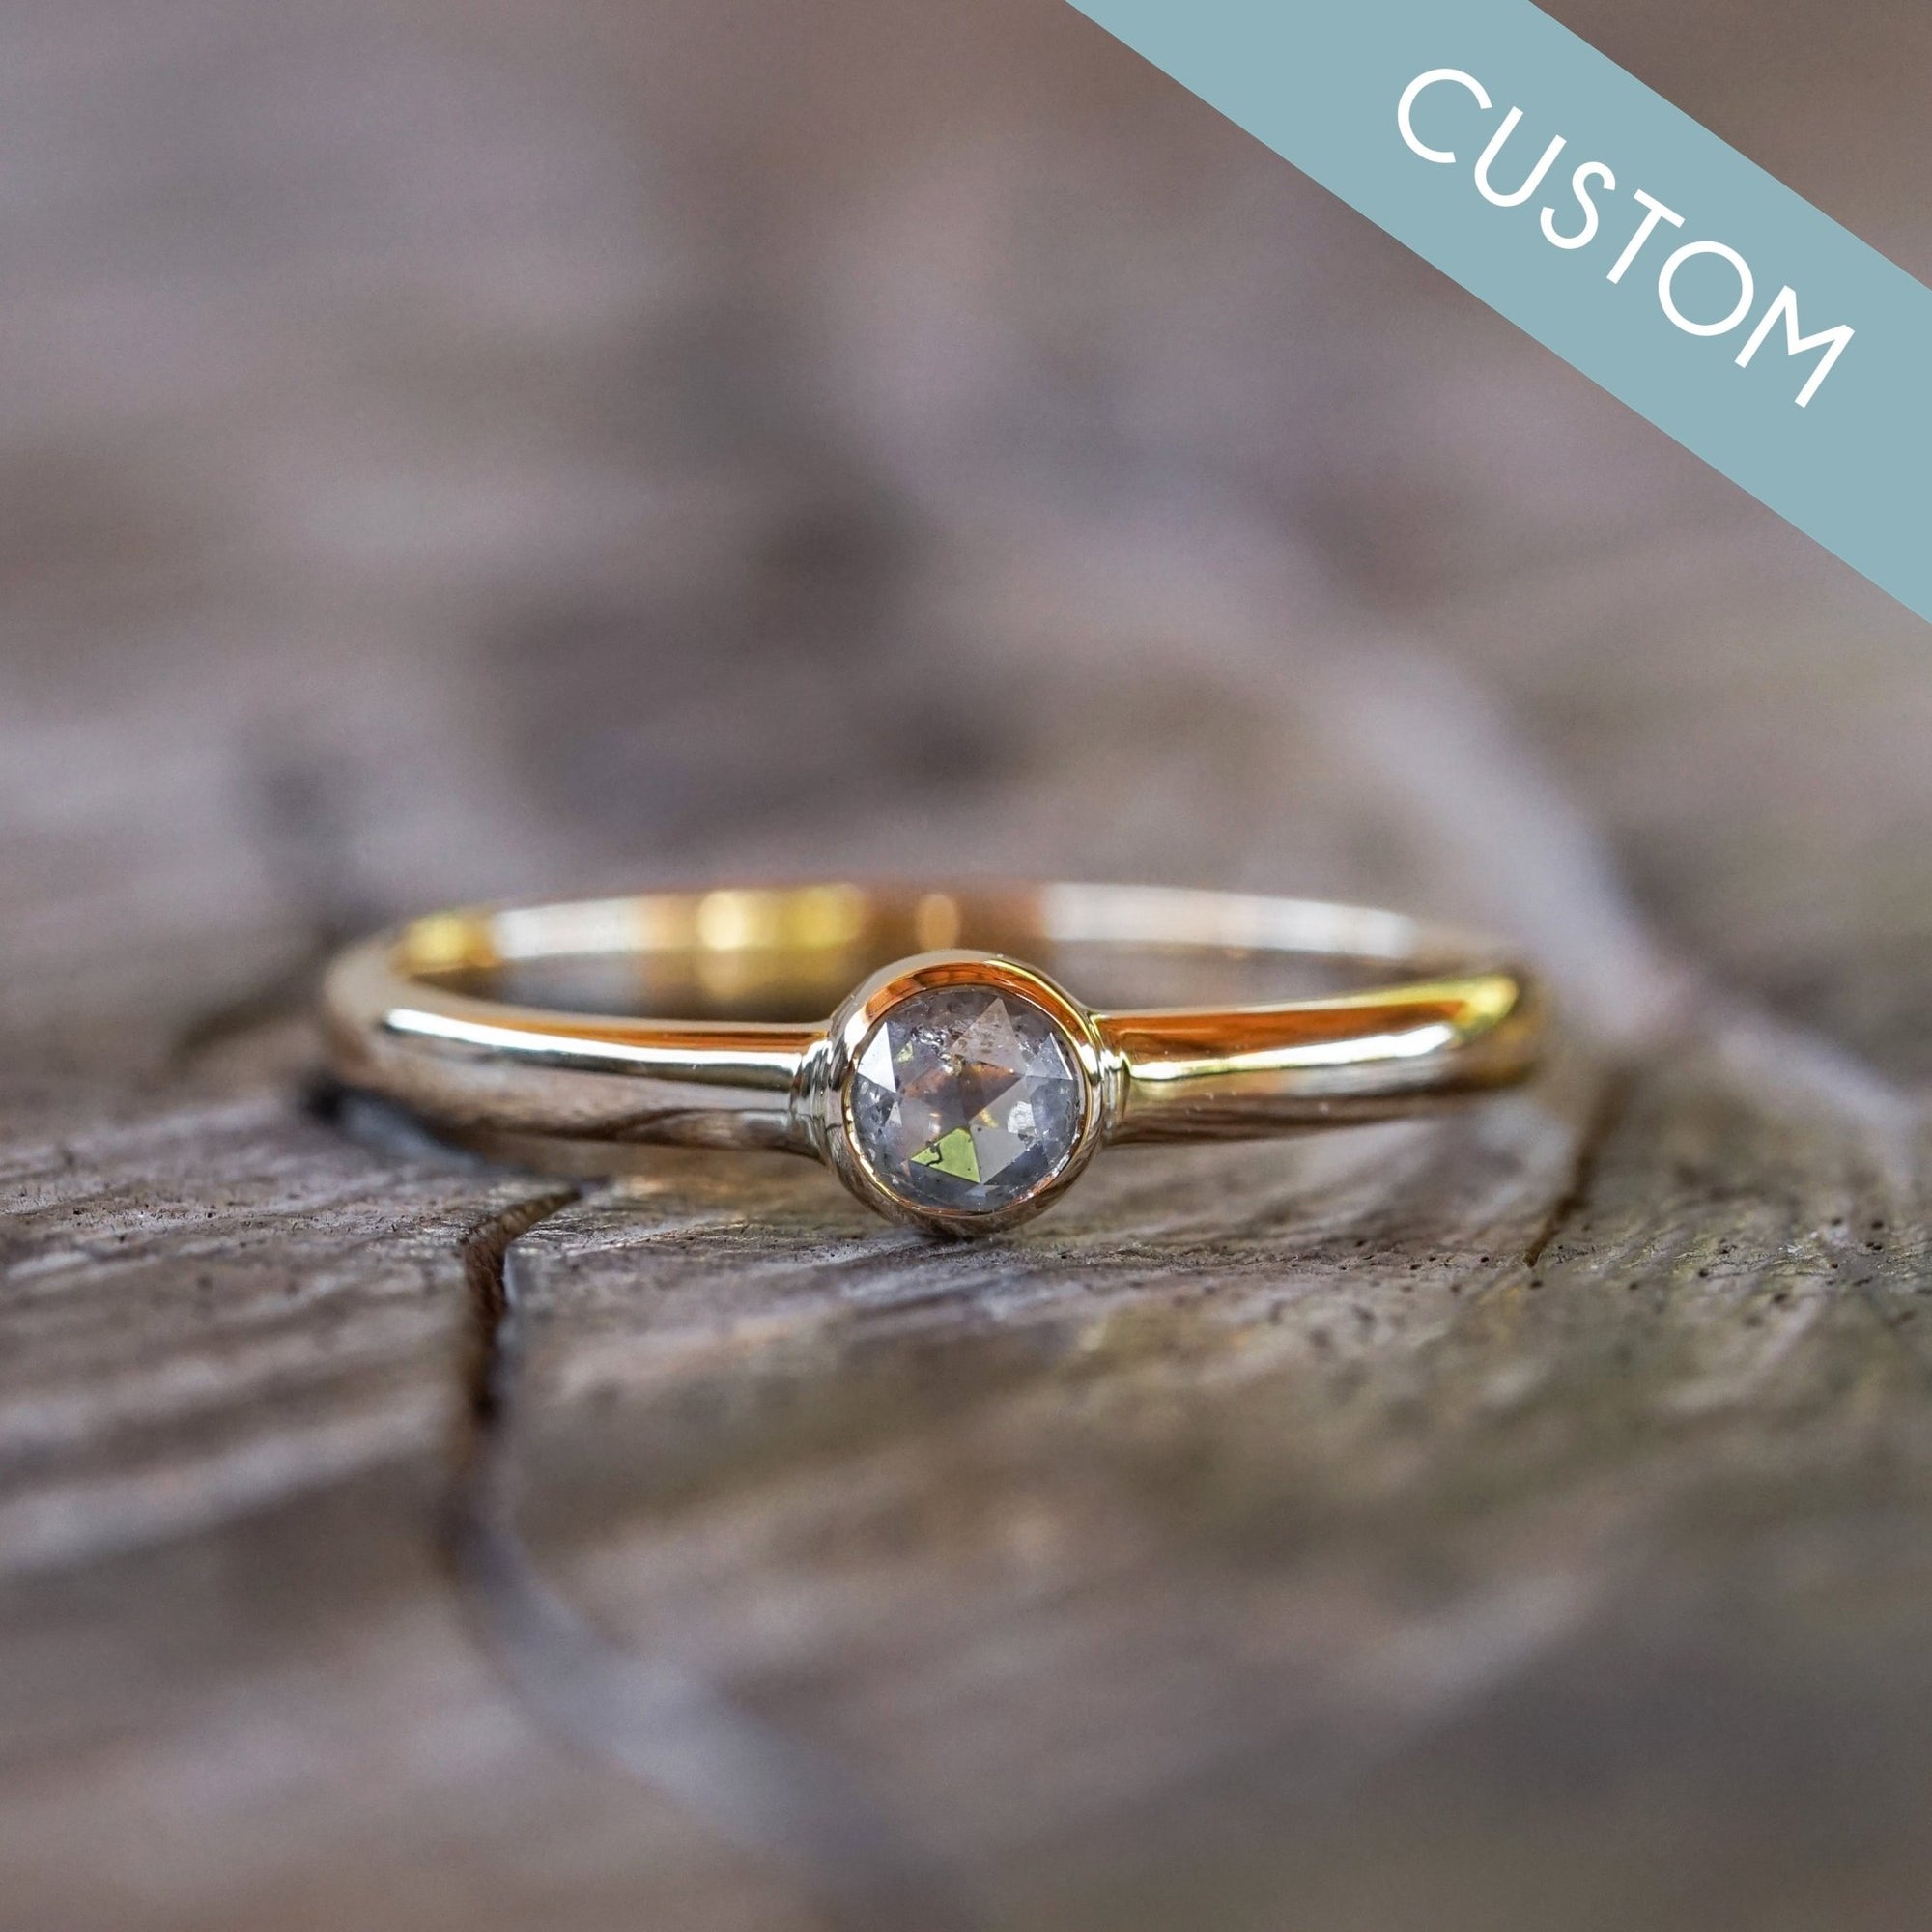 Custom Round Rose Cut Diamond Ring in Gold - Gardens of the Sun | Ethical Jewelry